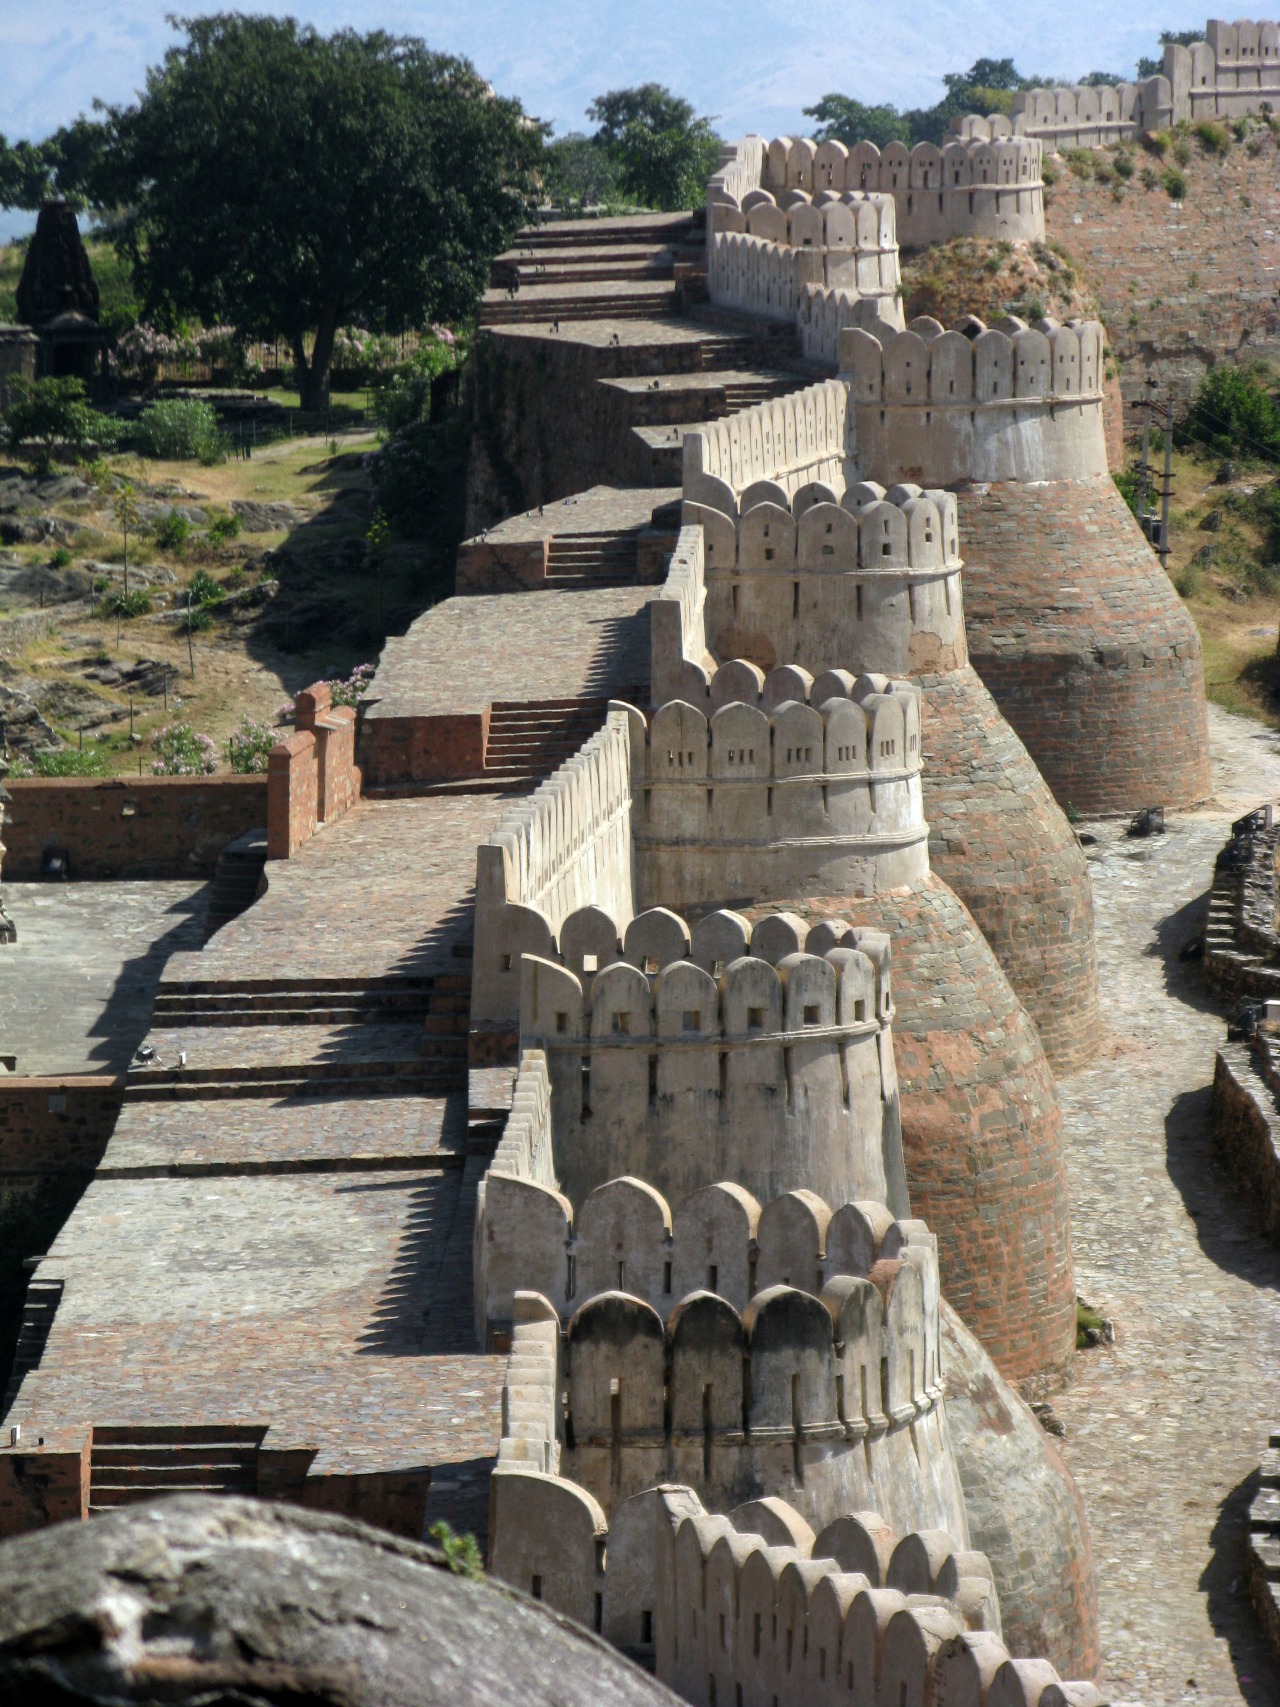 aadhuu:  The Kumbalgarh Fort Wall; second only to the great wall of china in length.